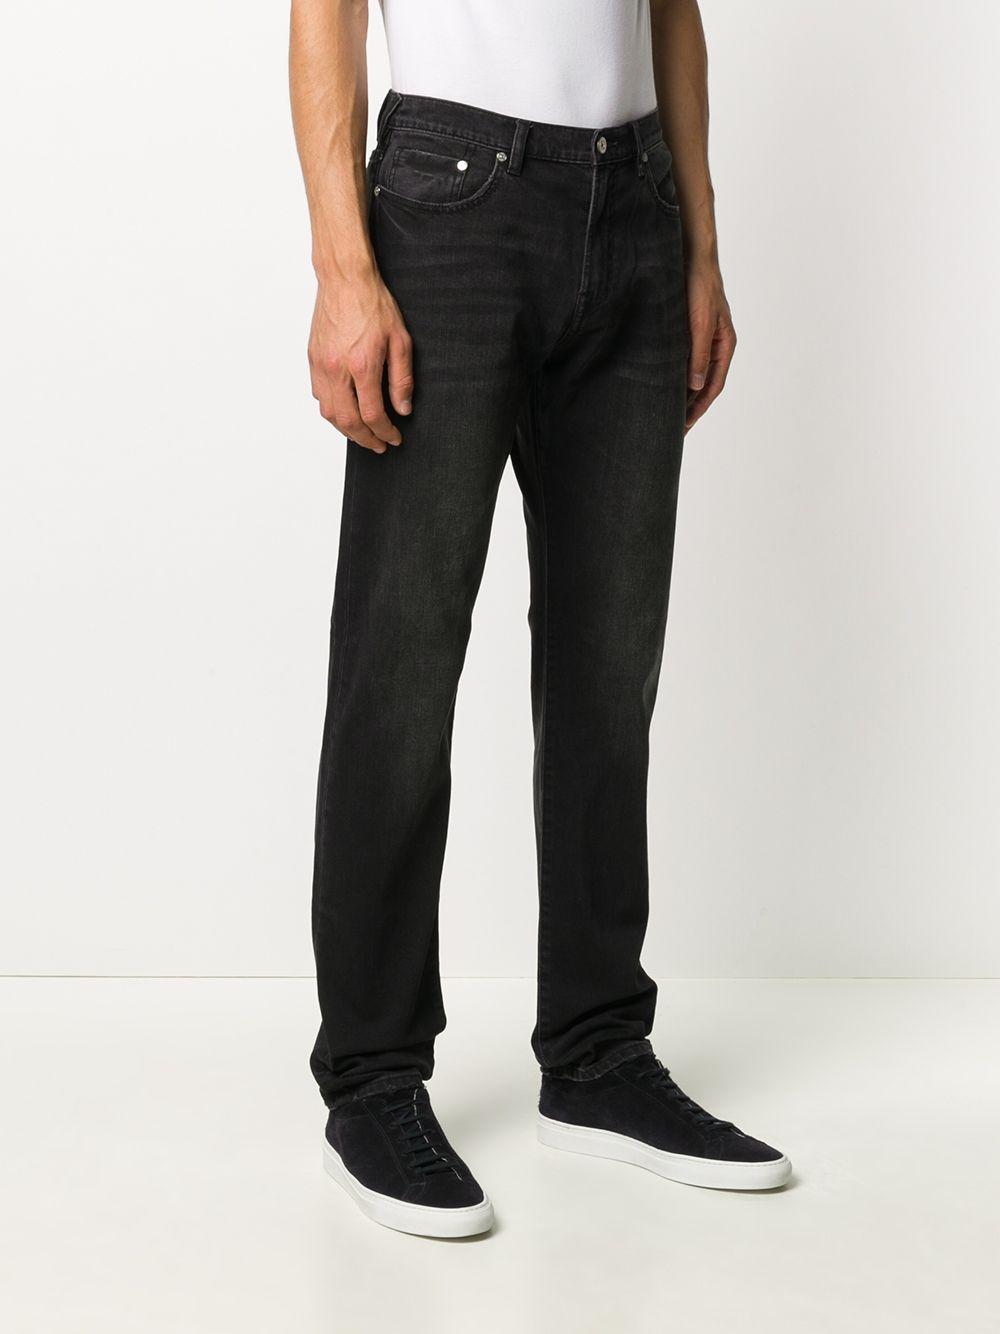 PS by Paul Smith Denim High-rise Straight Leg Jeans in Black for Men - Lyst